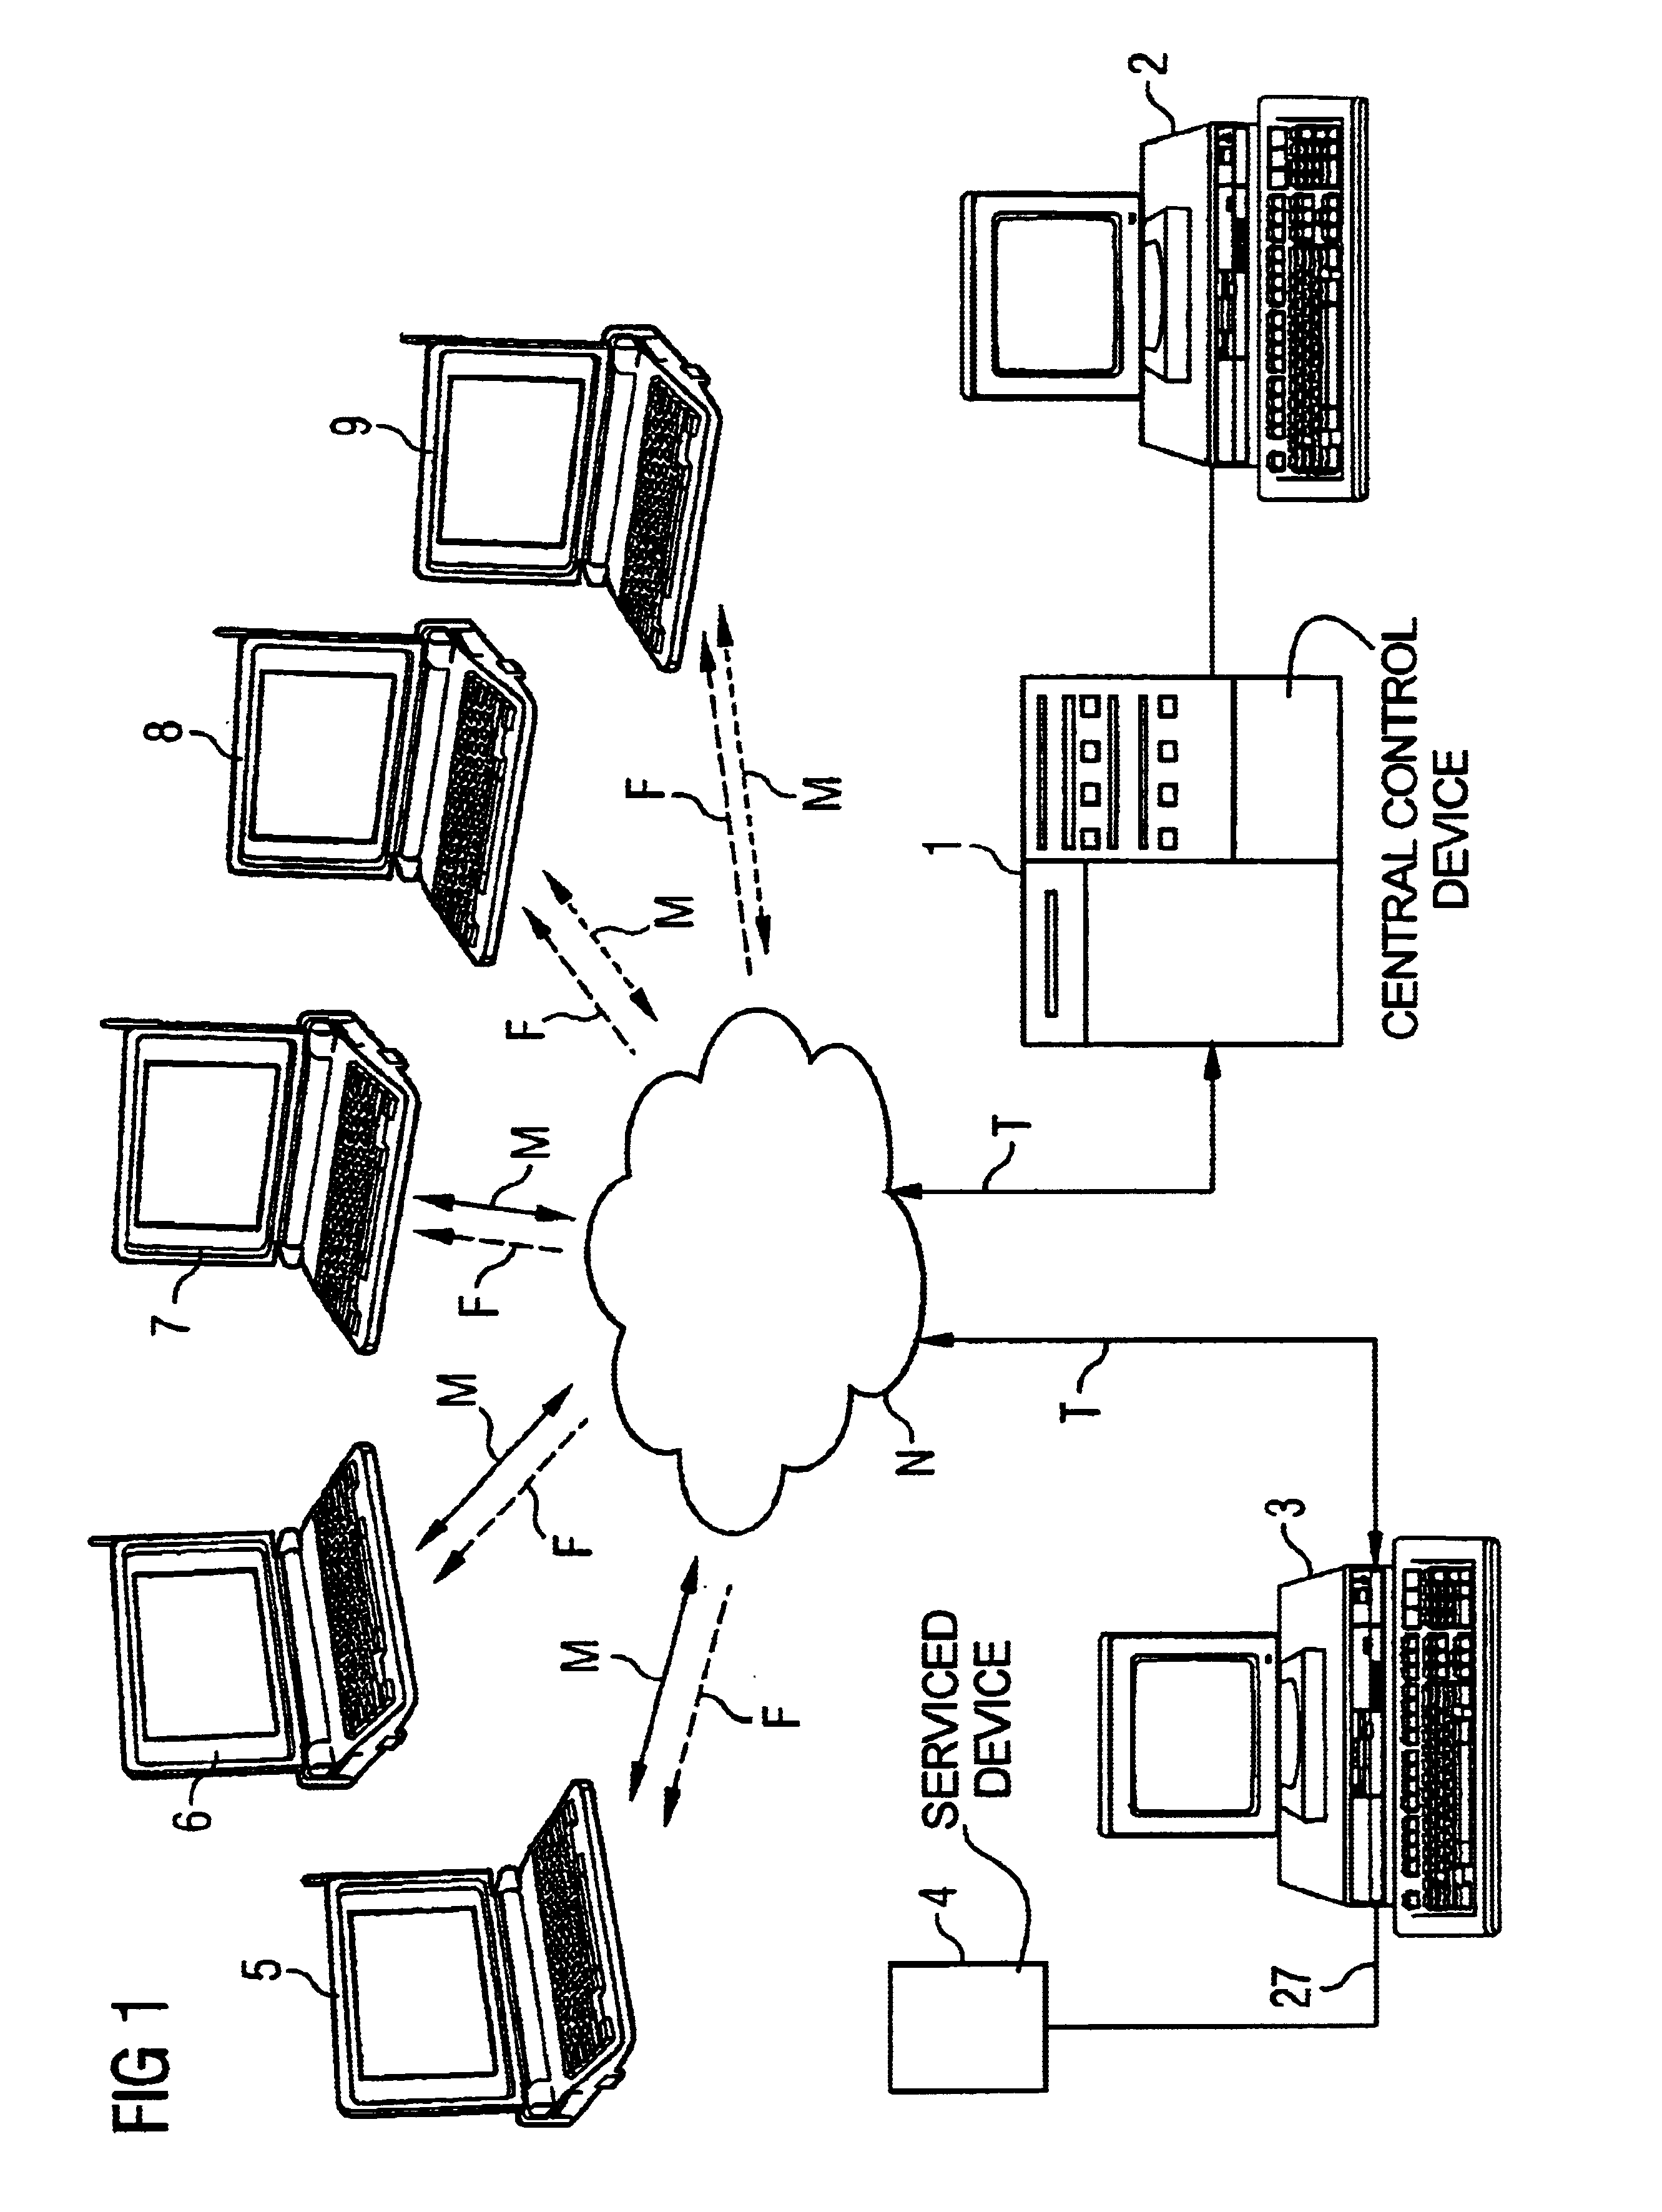 Control method and system for automatic pre-processing of device malfunctions